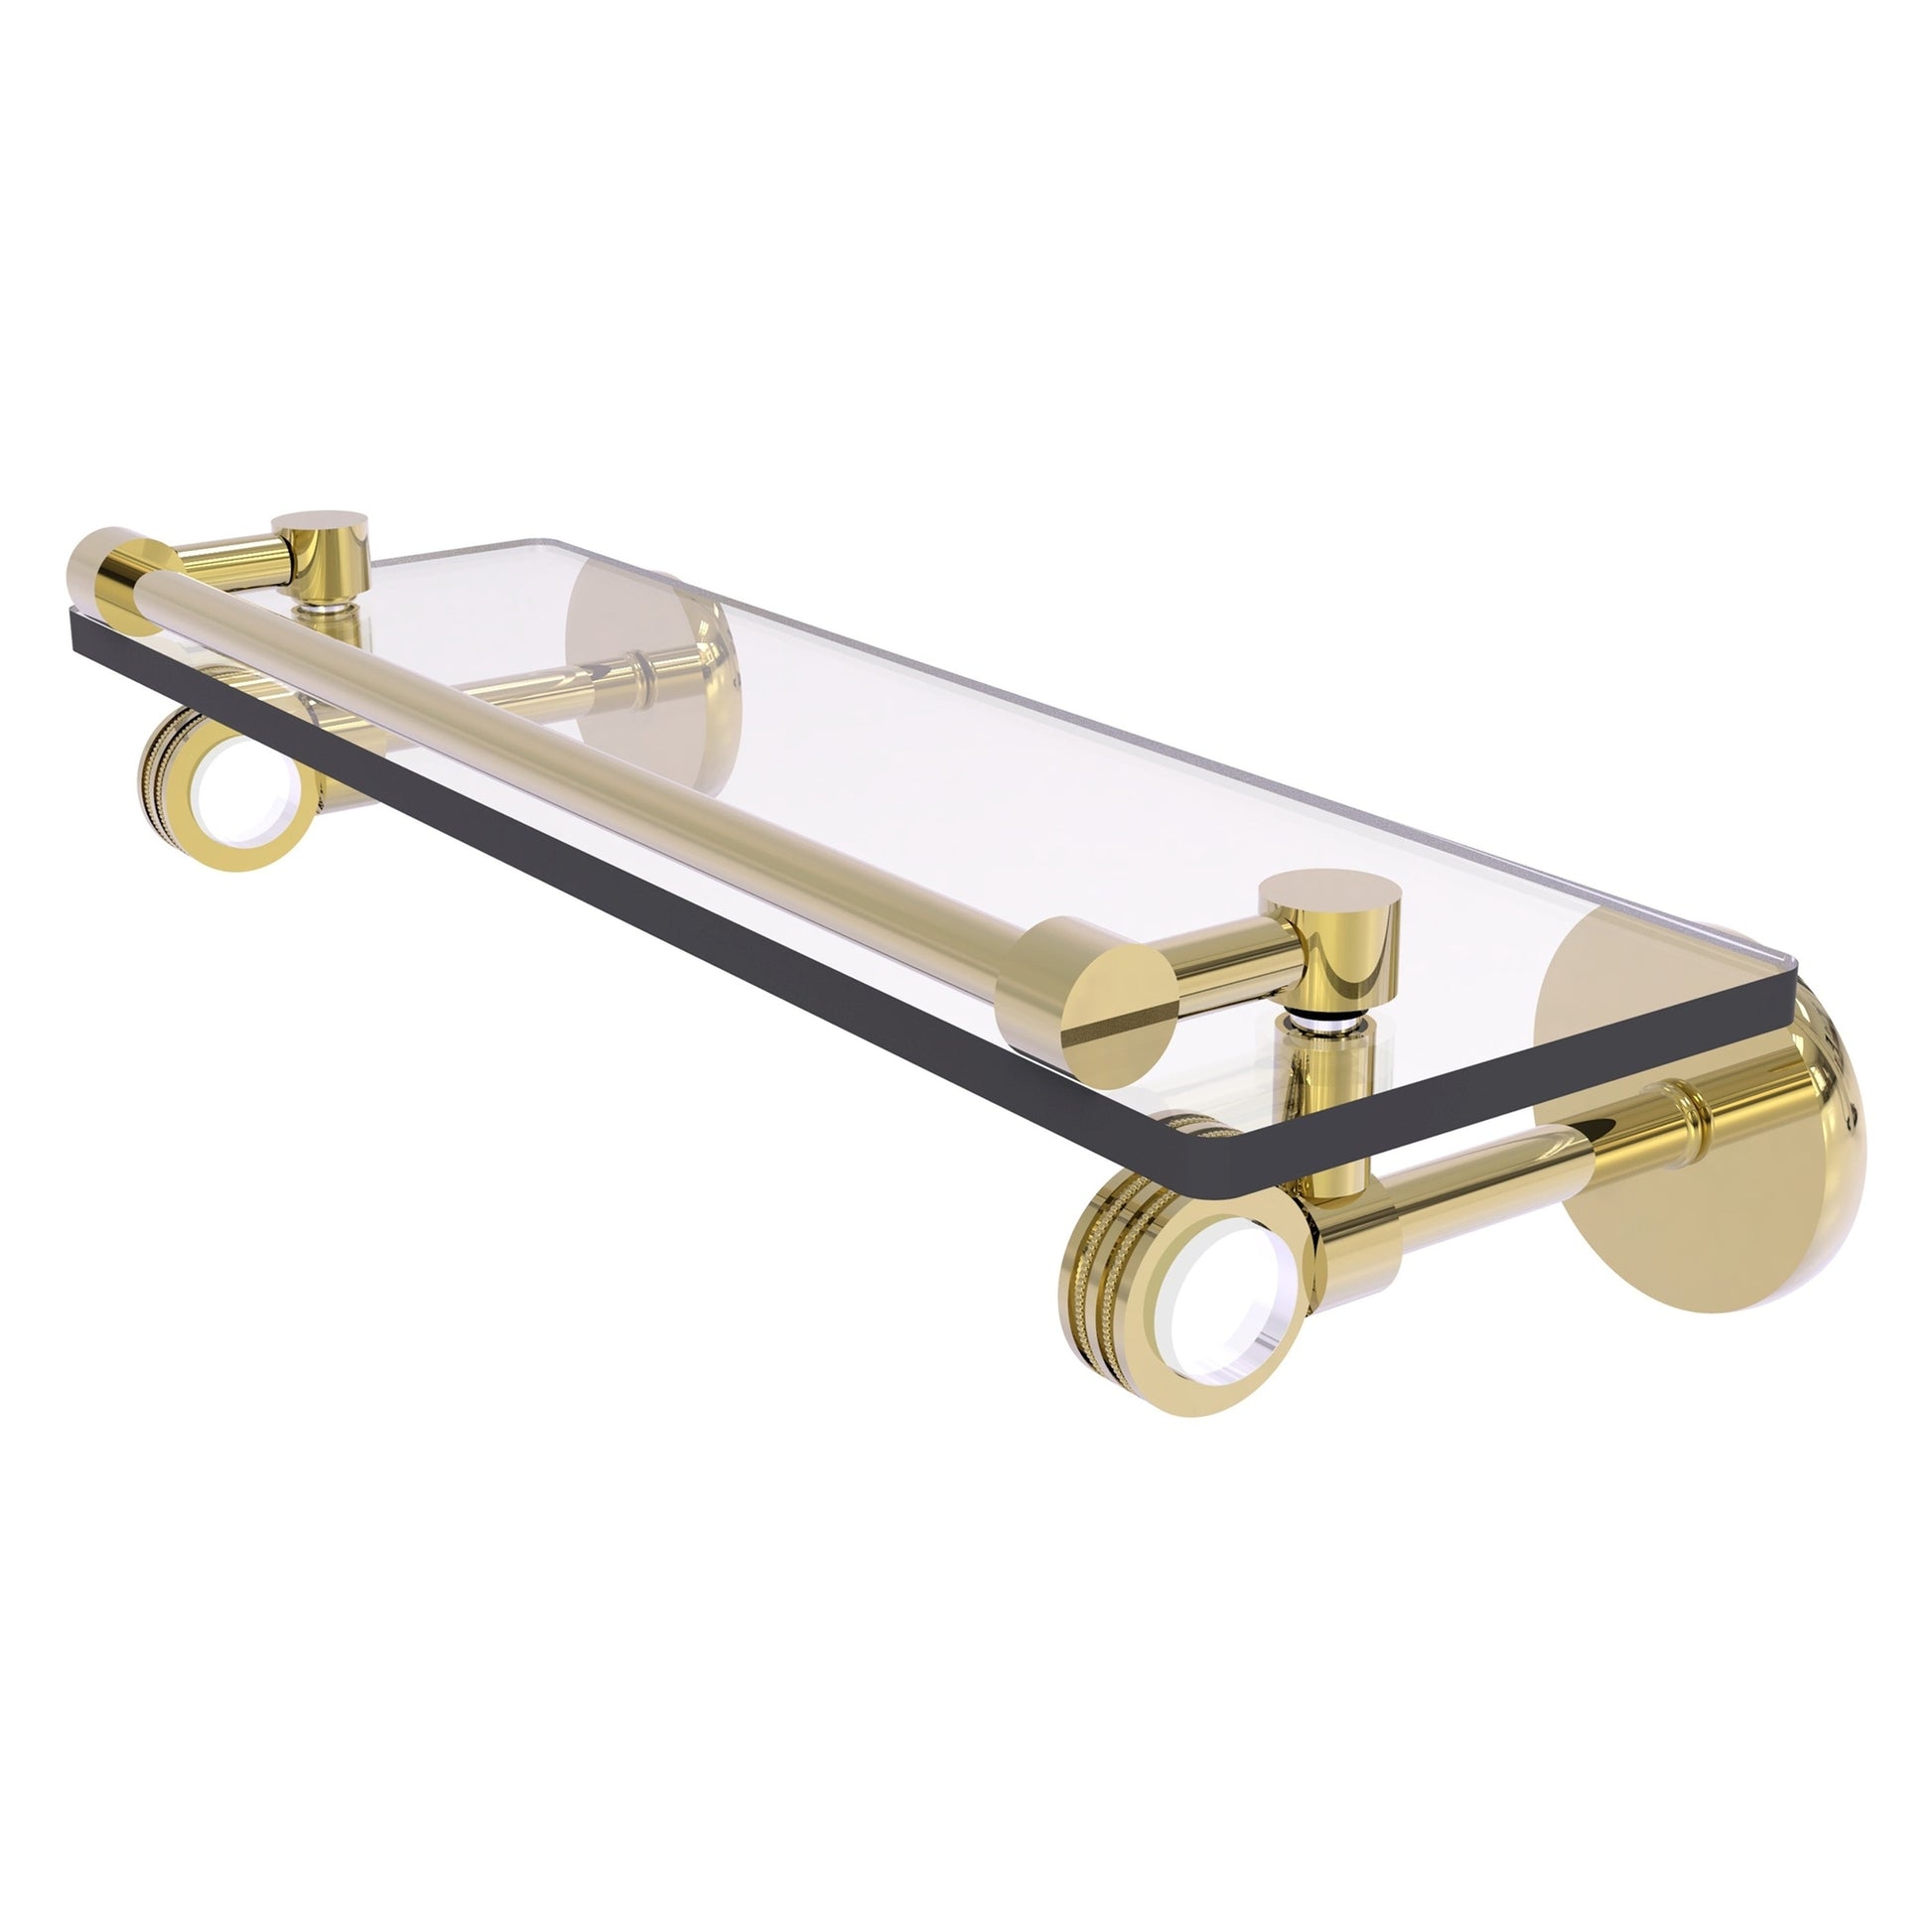 https://usbathstore.com/cdn/shop/files/Allied-Brass-Clearview-16-x-5_65-Unlacquered-Brass-Solid-Brass-Gallery-Rail-Glass-Shelf-With-Dotted-Accents.jpg?v=1694396674&width=1946